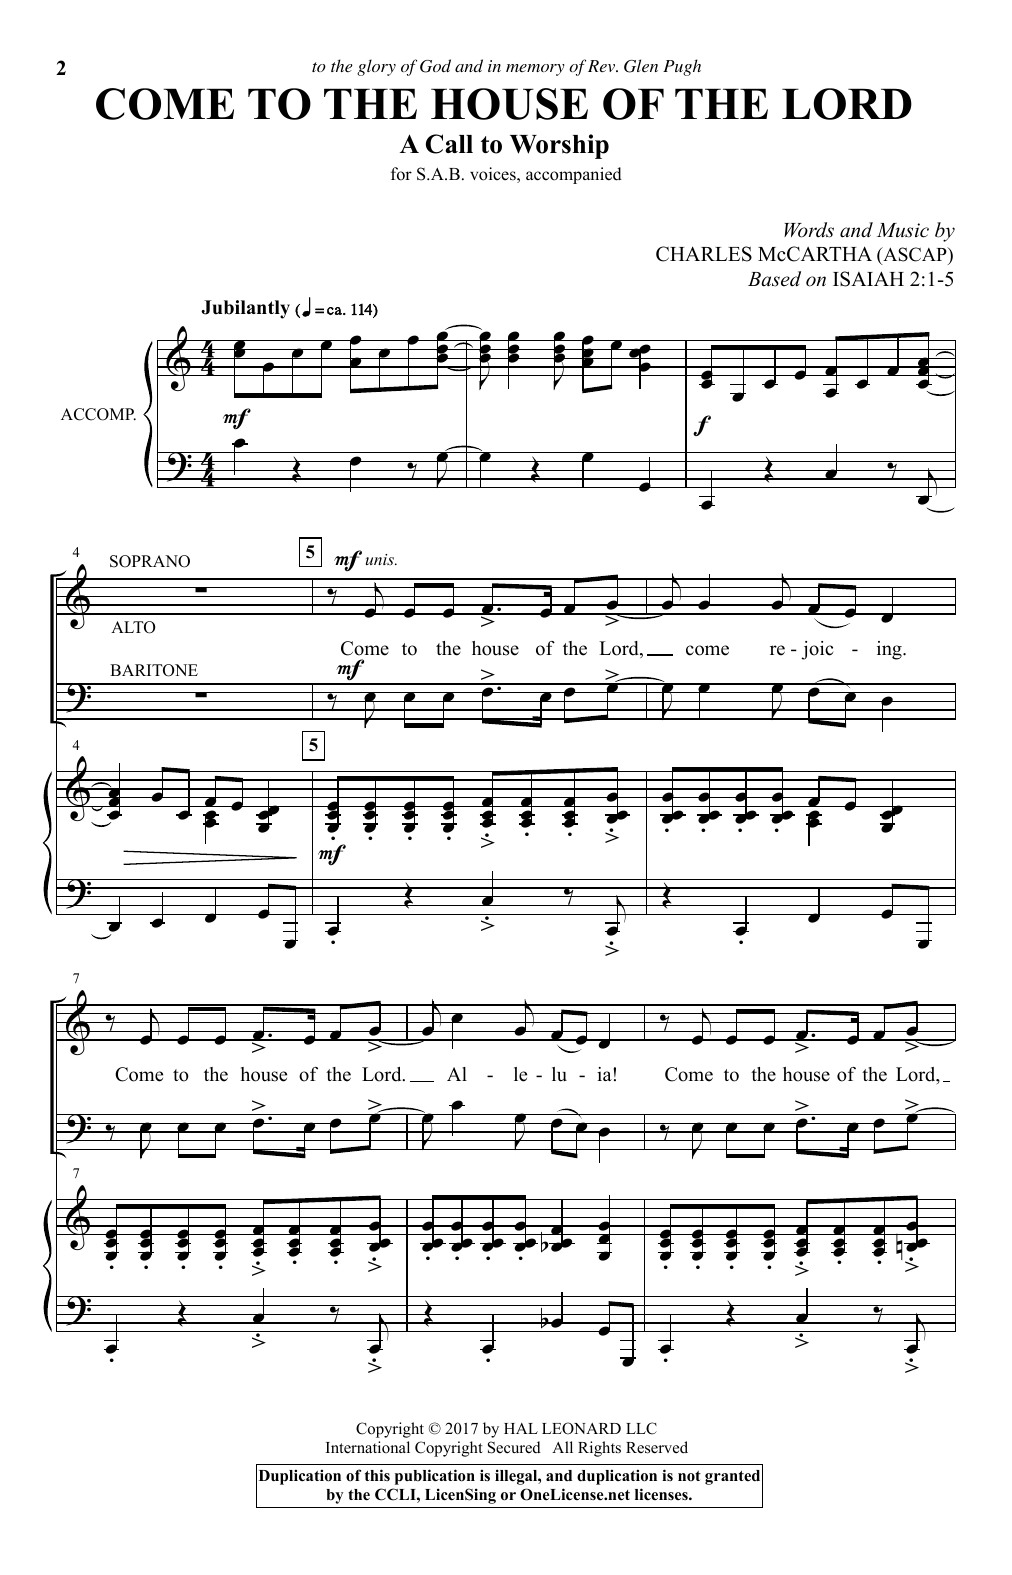 Download Charles McCartha Come To The House Of The Lord Sheet Music